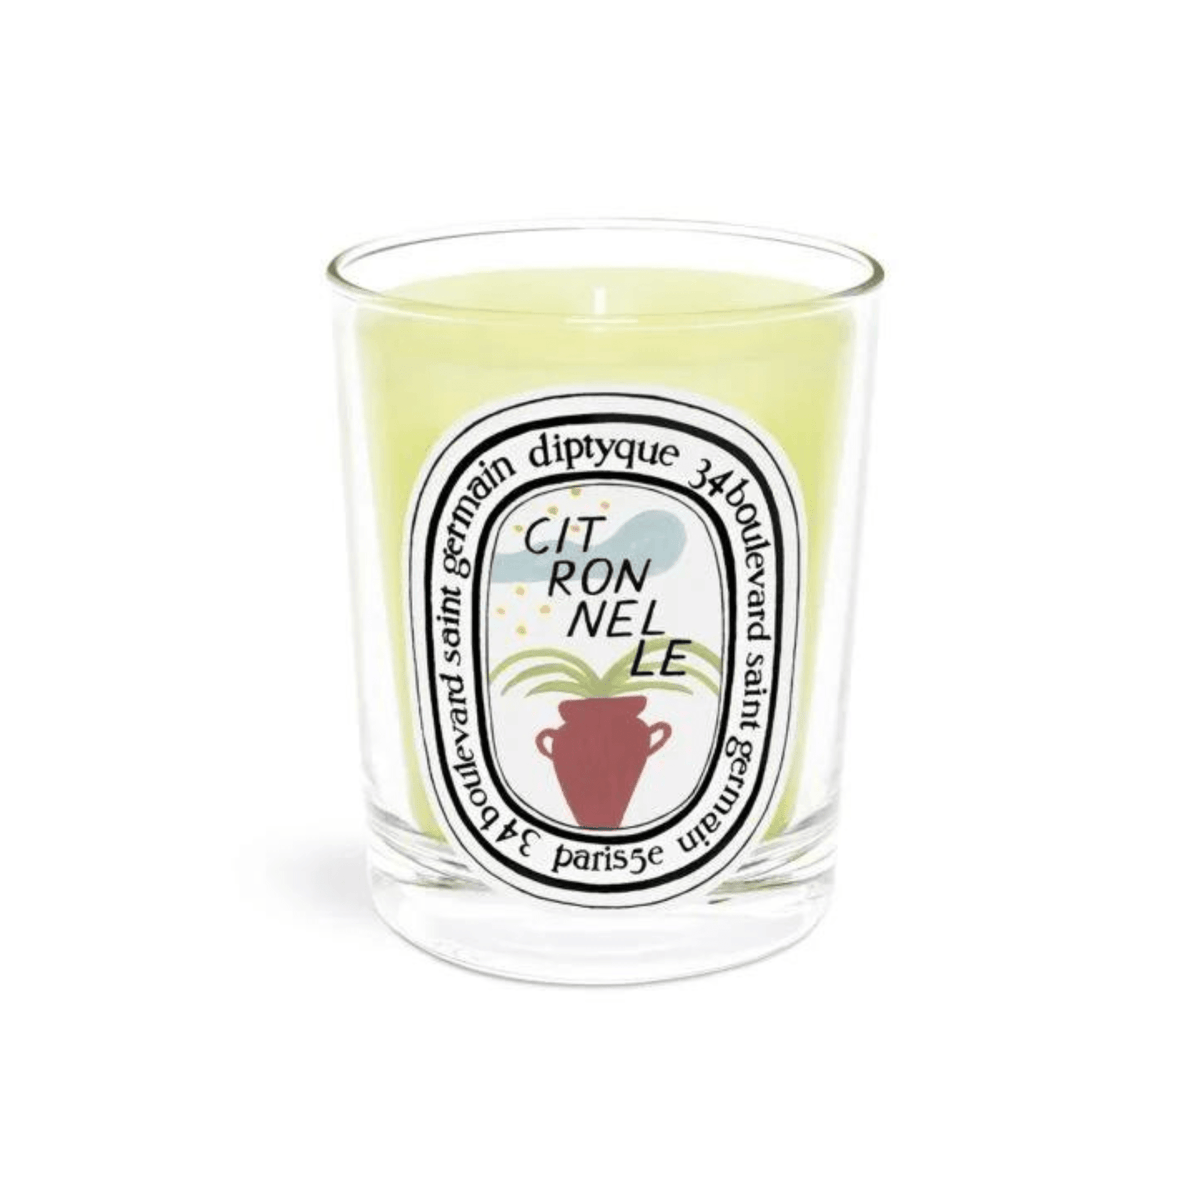 Primary Image of Limited Edition Citronnelle Candle